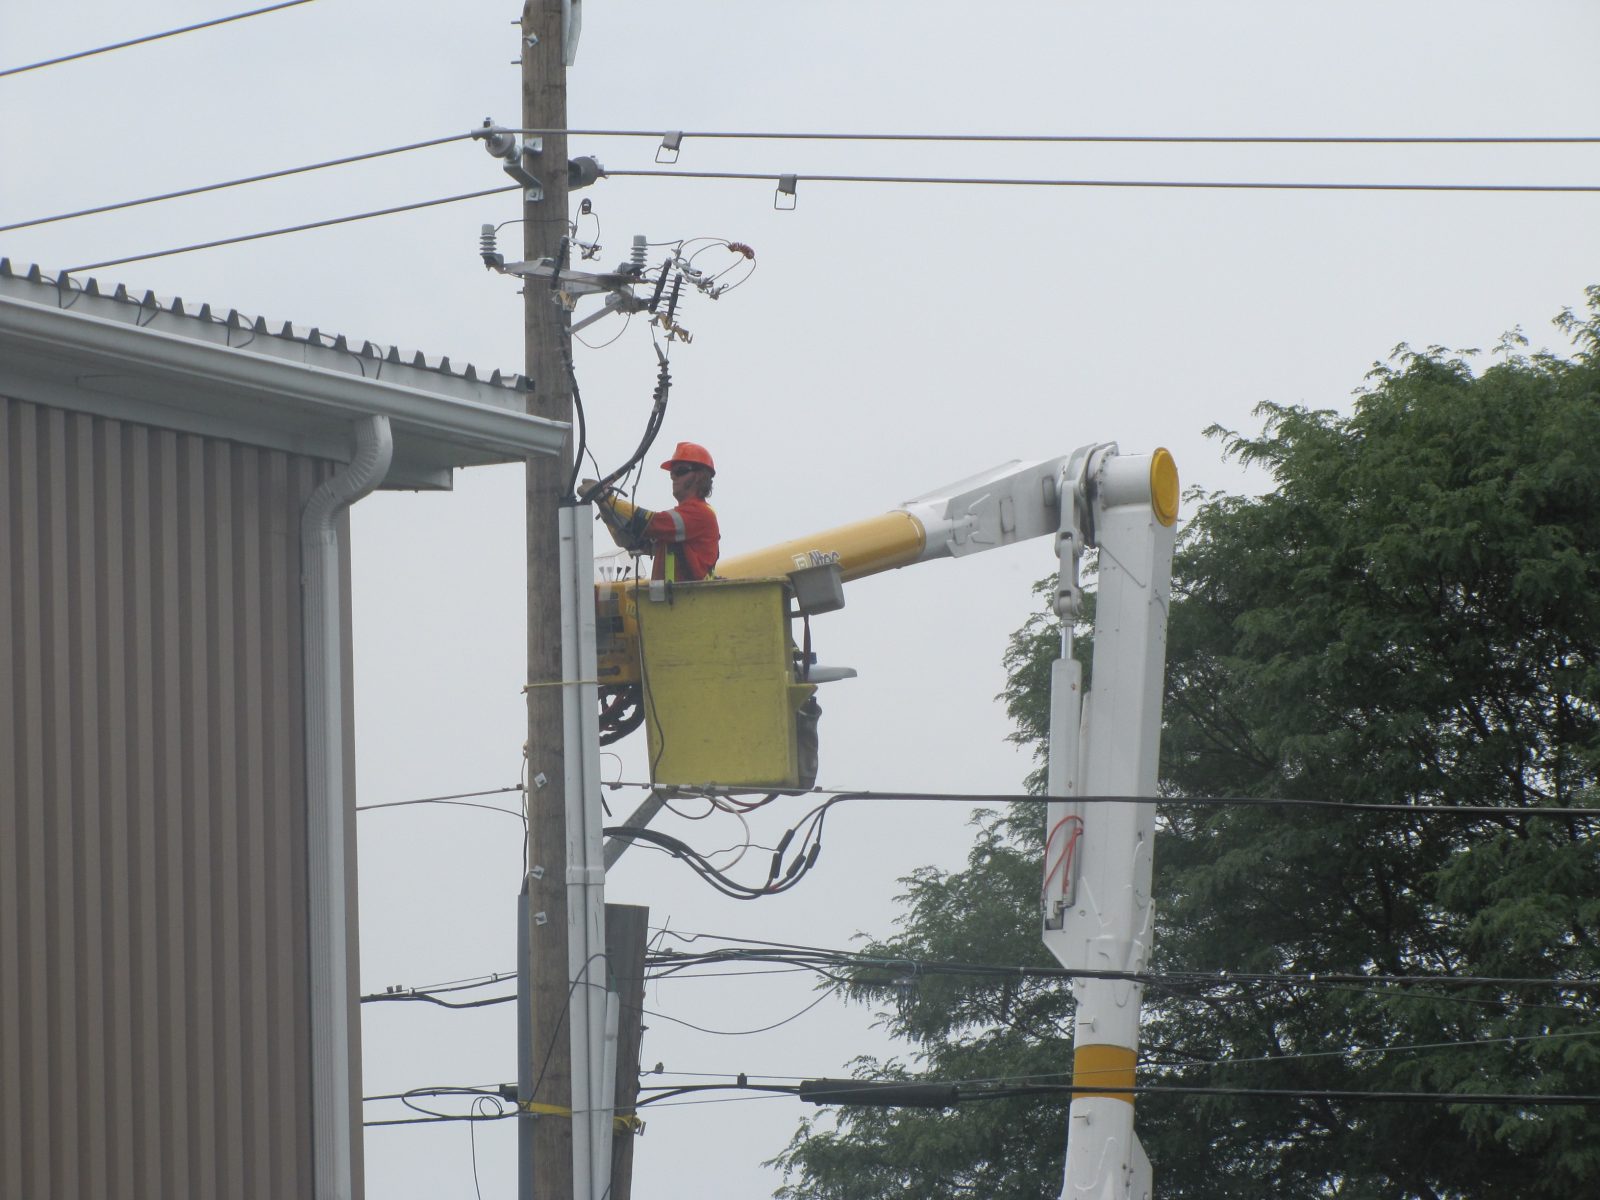 Cornwall Electric franchise negotiations could cost $91, 000